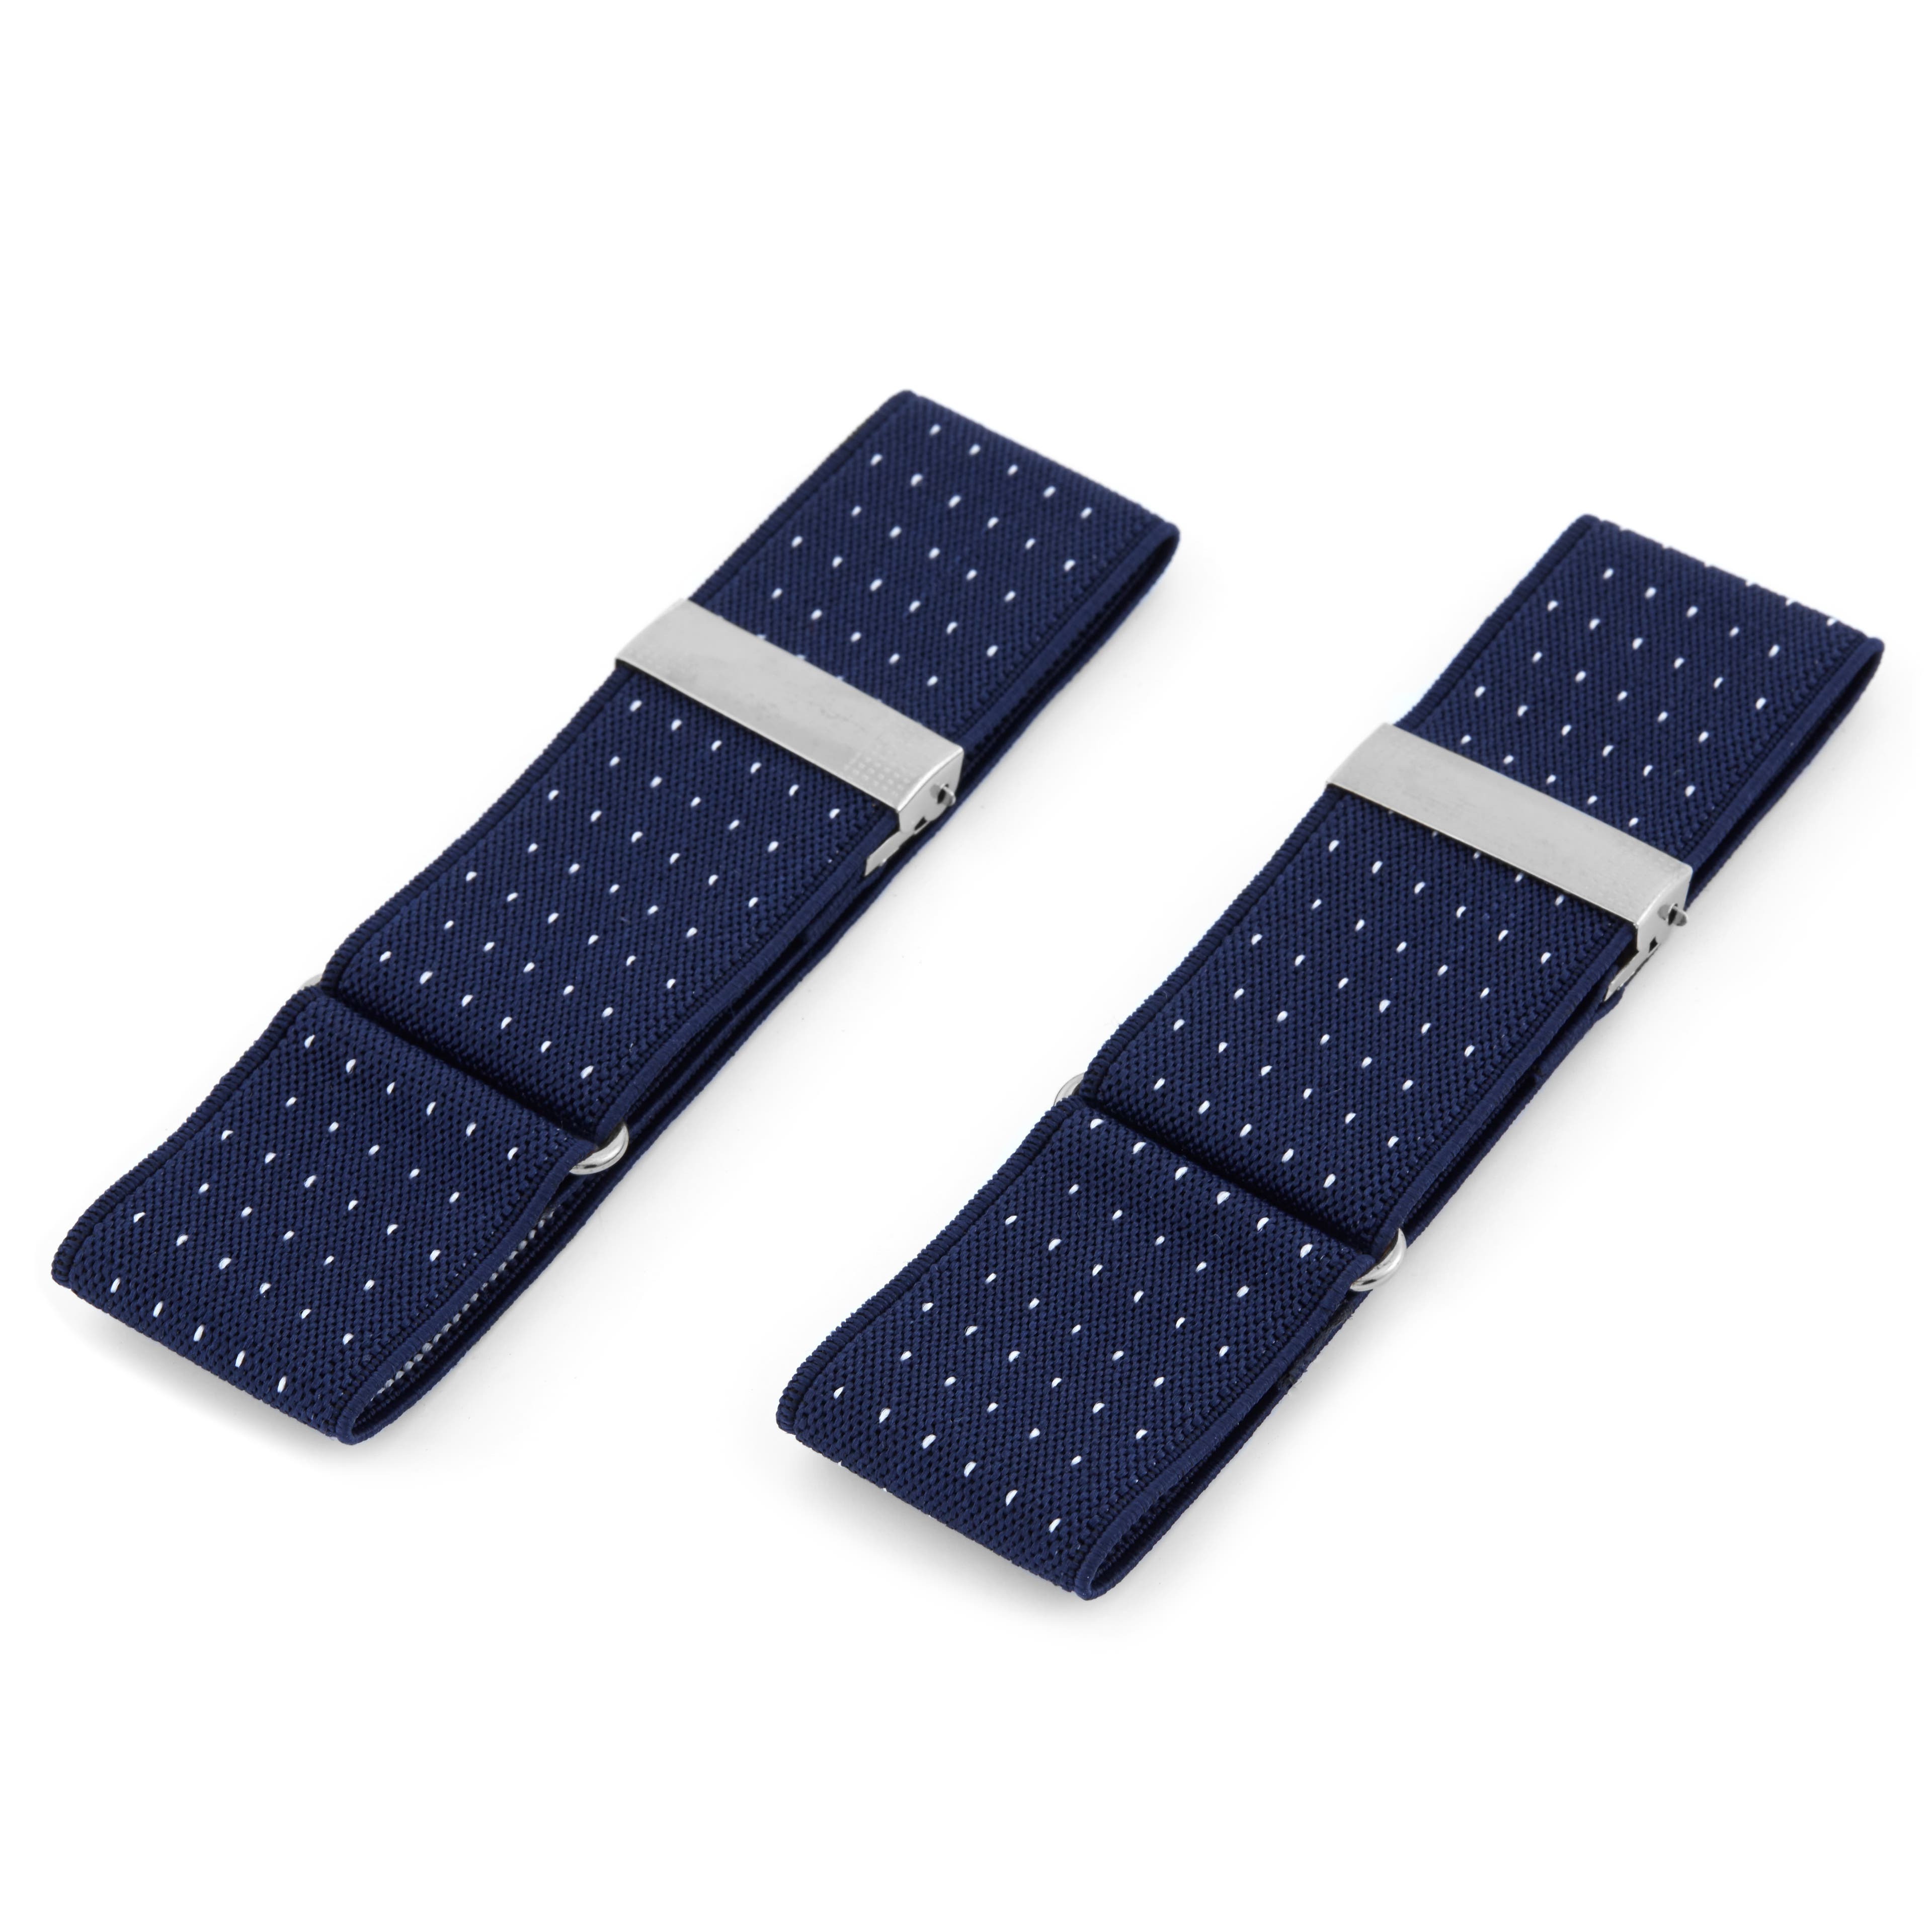 Navy Blue & White Dotted Sleeve Garters